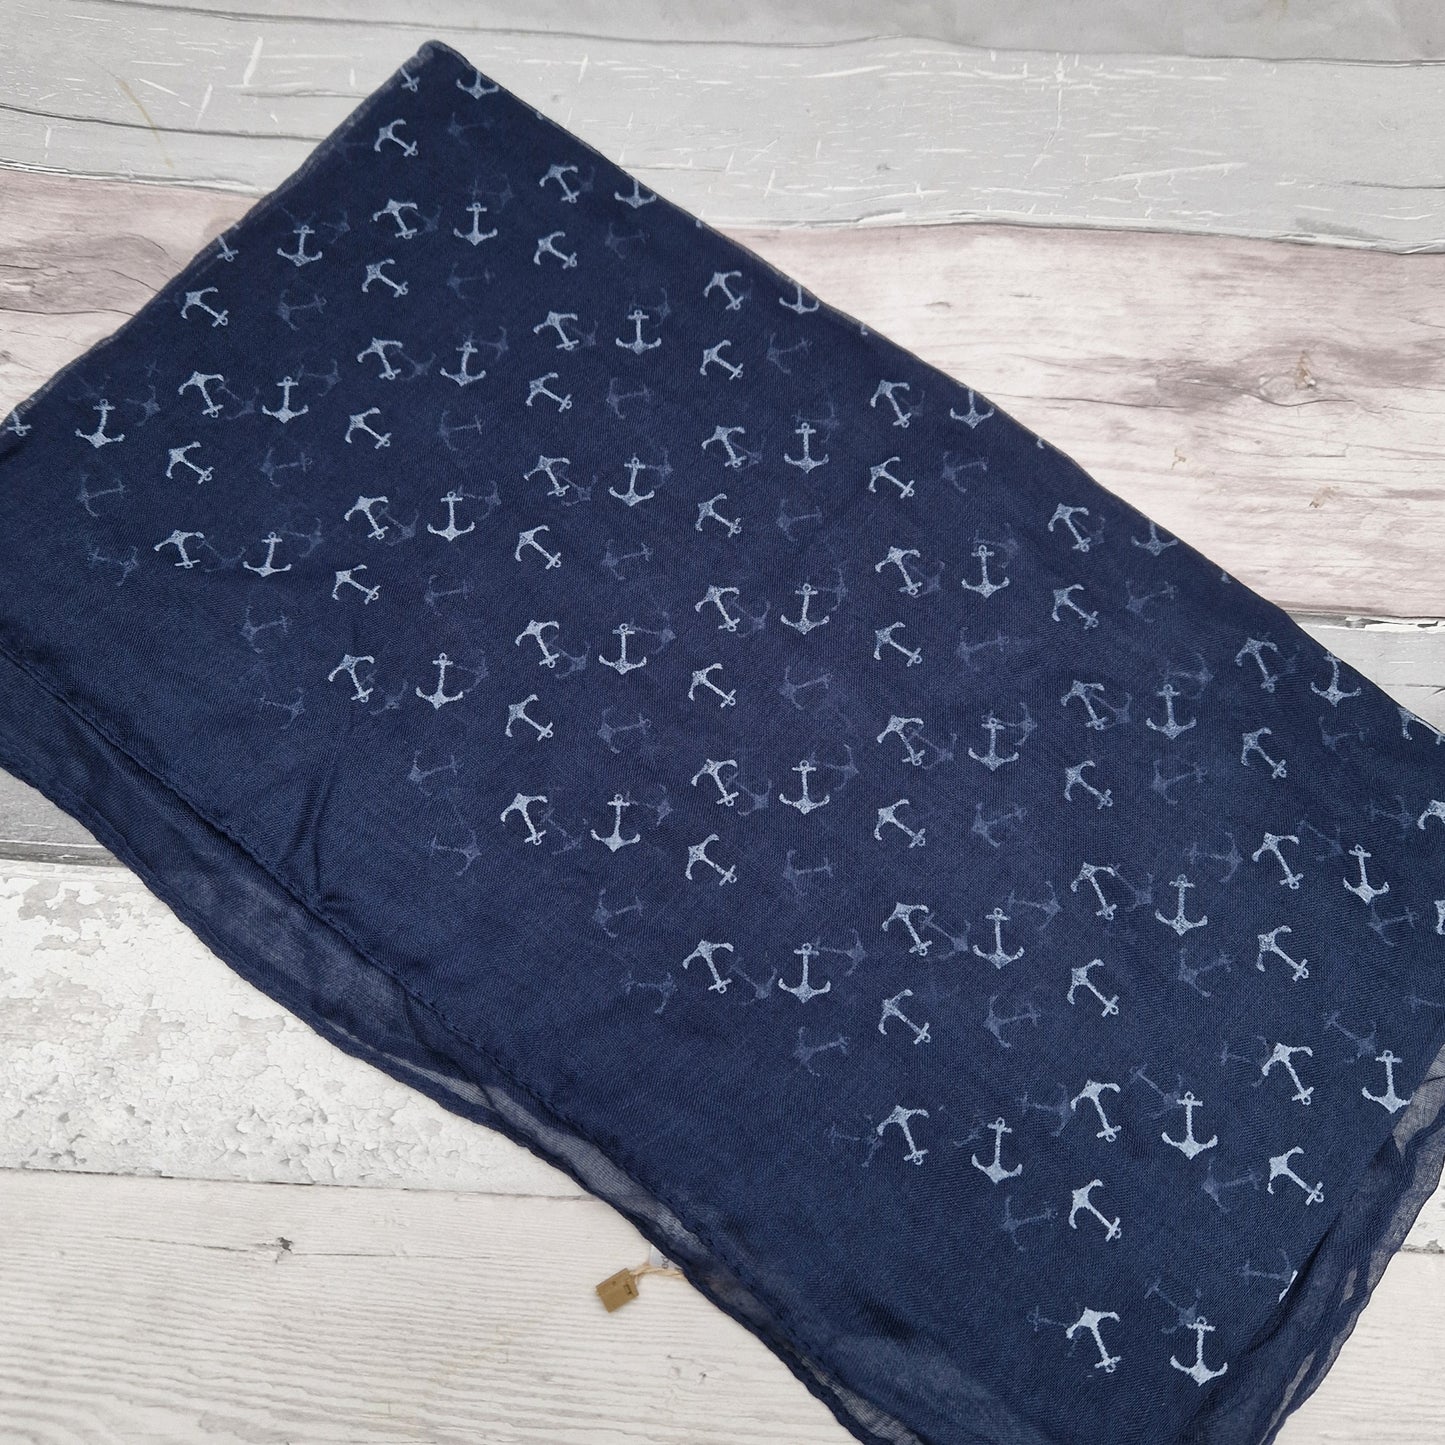 Nautical themed scarf in classic navy, decorated with white anchors